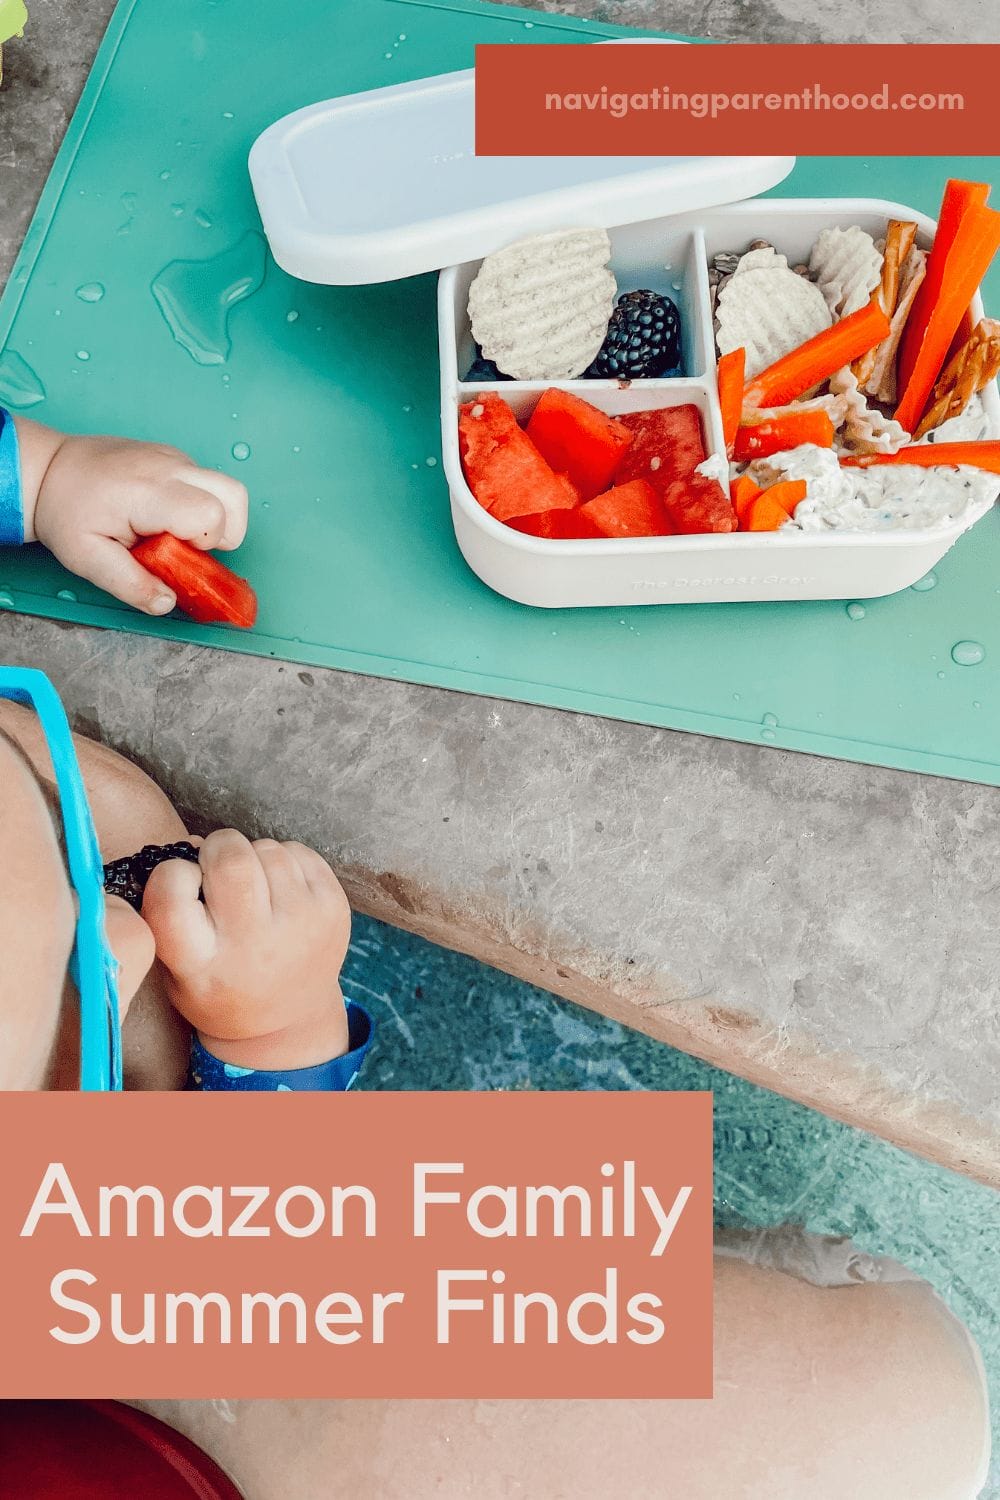 Amazon Family Summer Finds